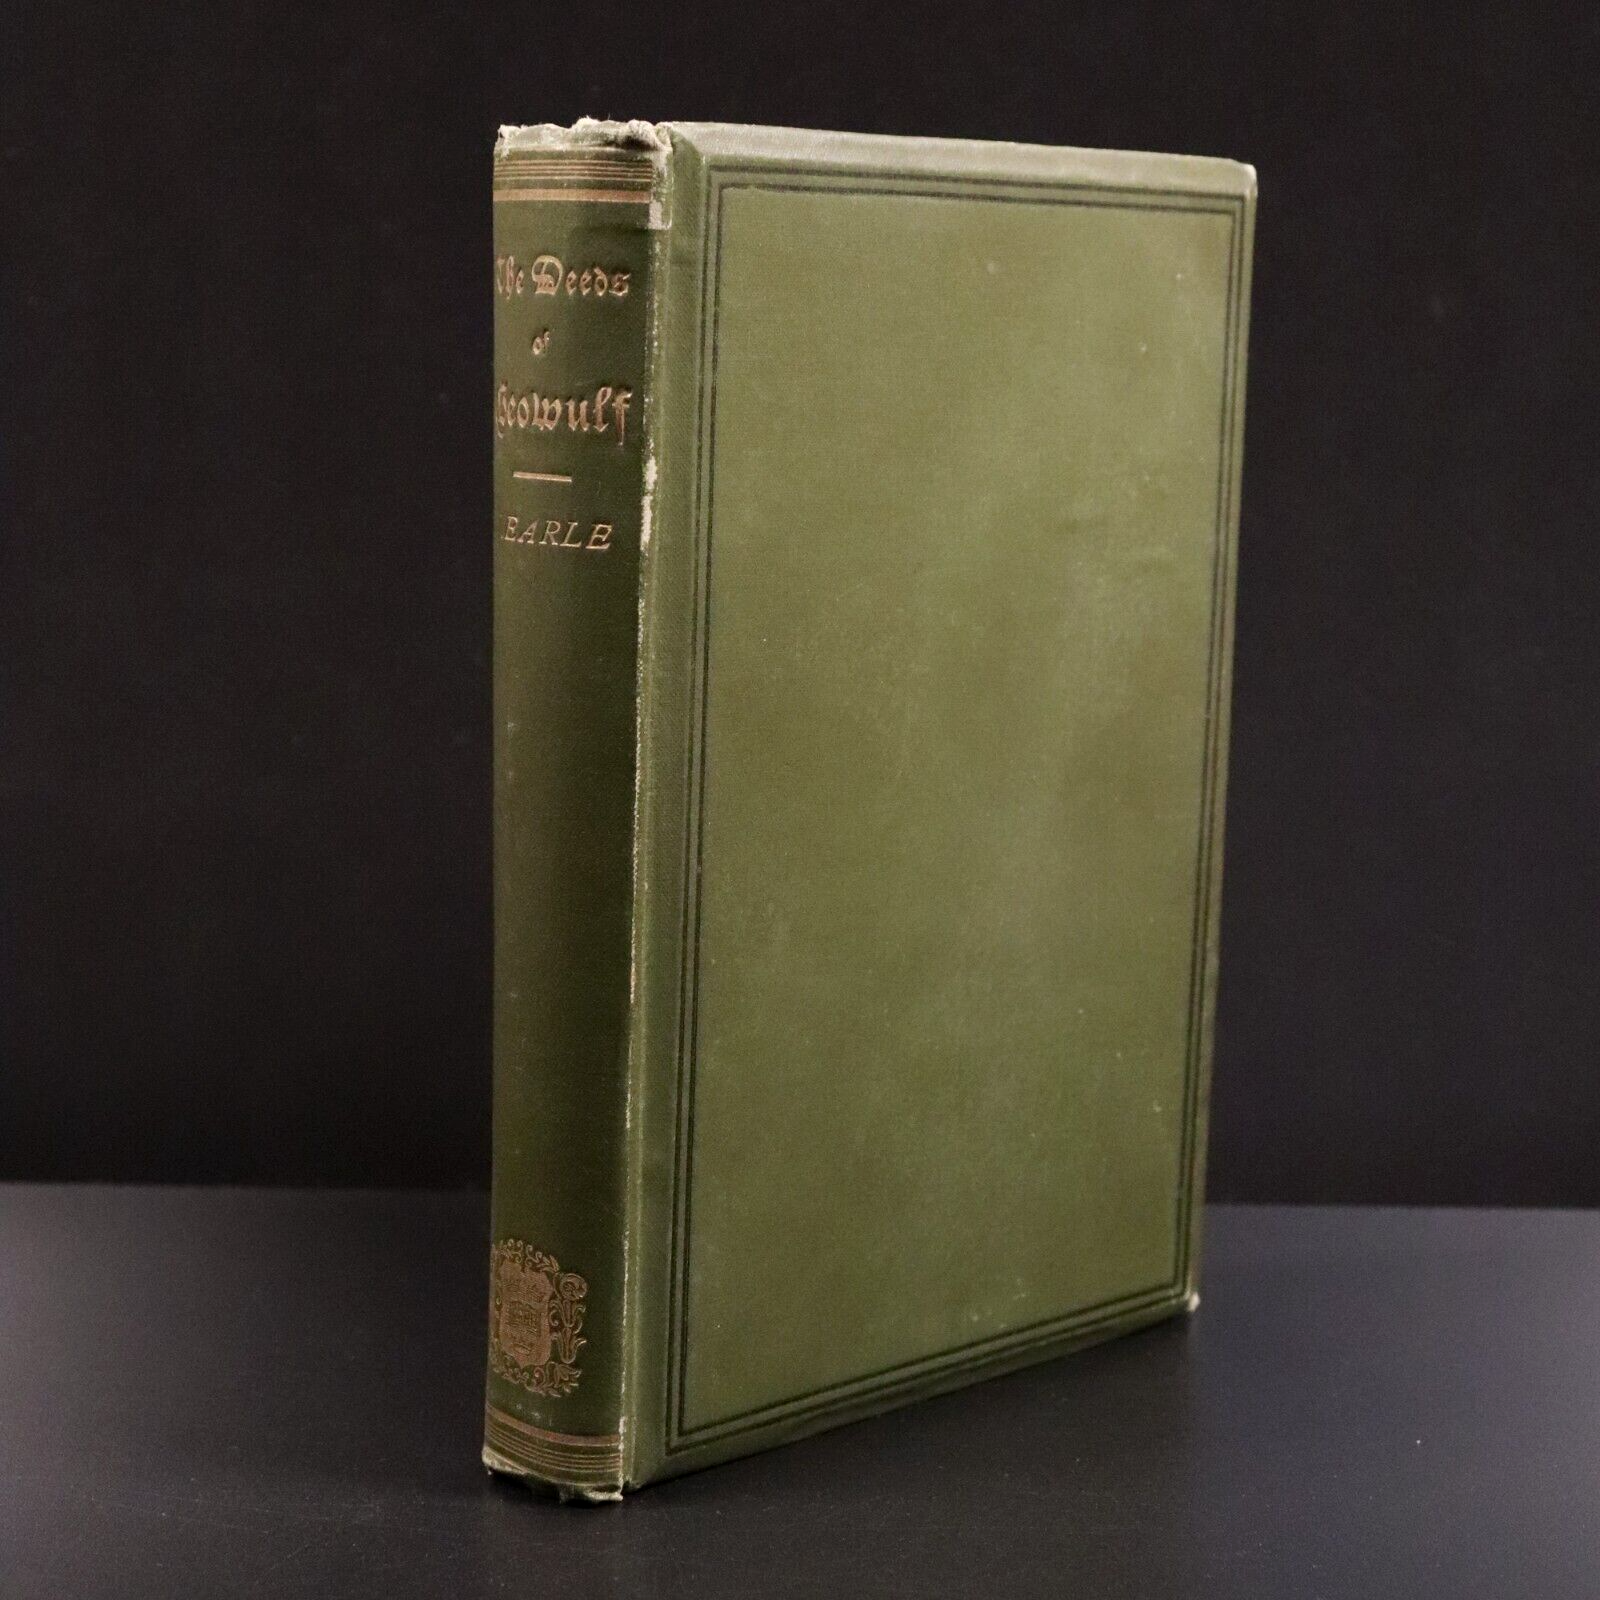 1892 The Deeds Of Beowulf by John Earle Antiquarian 8th Century Era Fiction Book